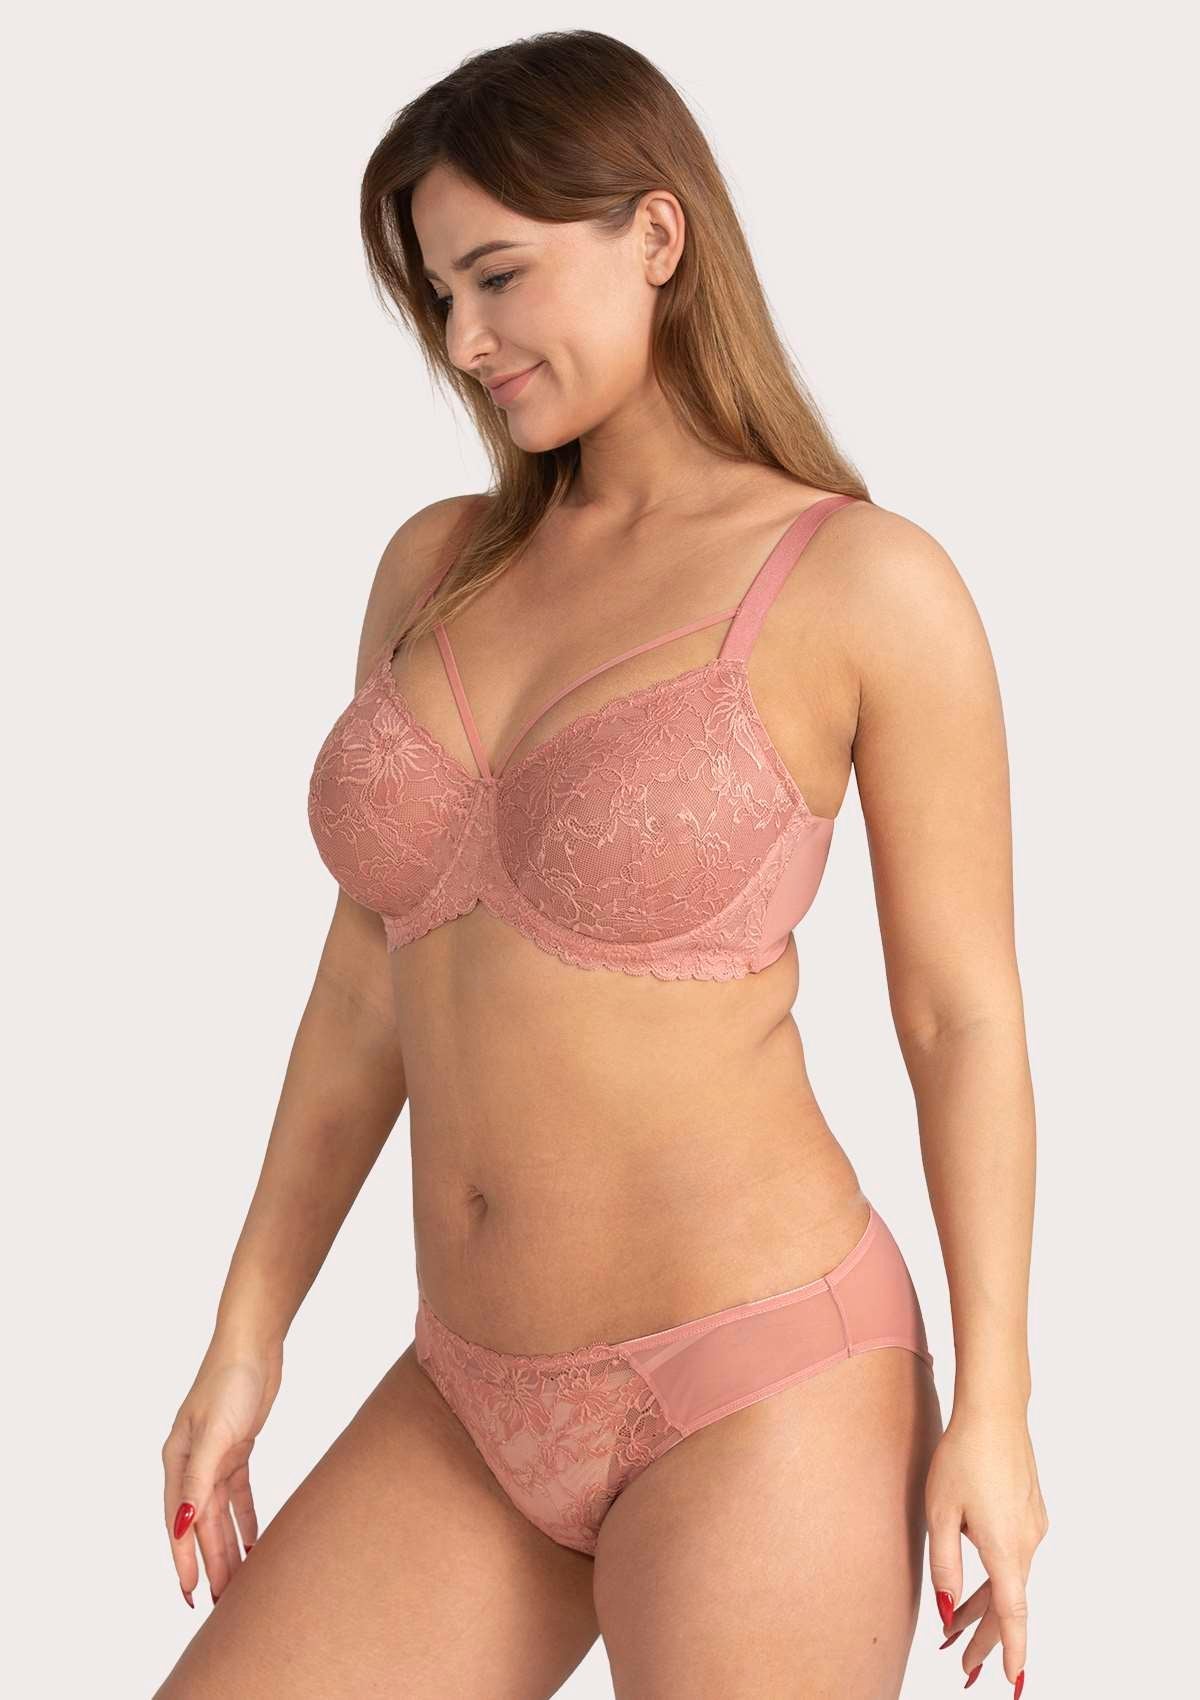 HSIA Pretty In Petals Lace Bra And Panty Sets: Bra For Big Boobs - Light Coral / 36 / D